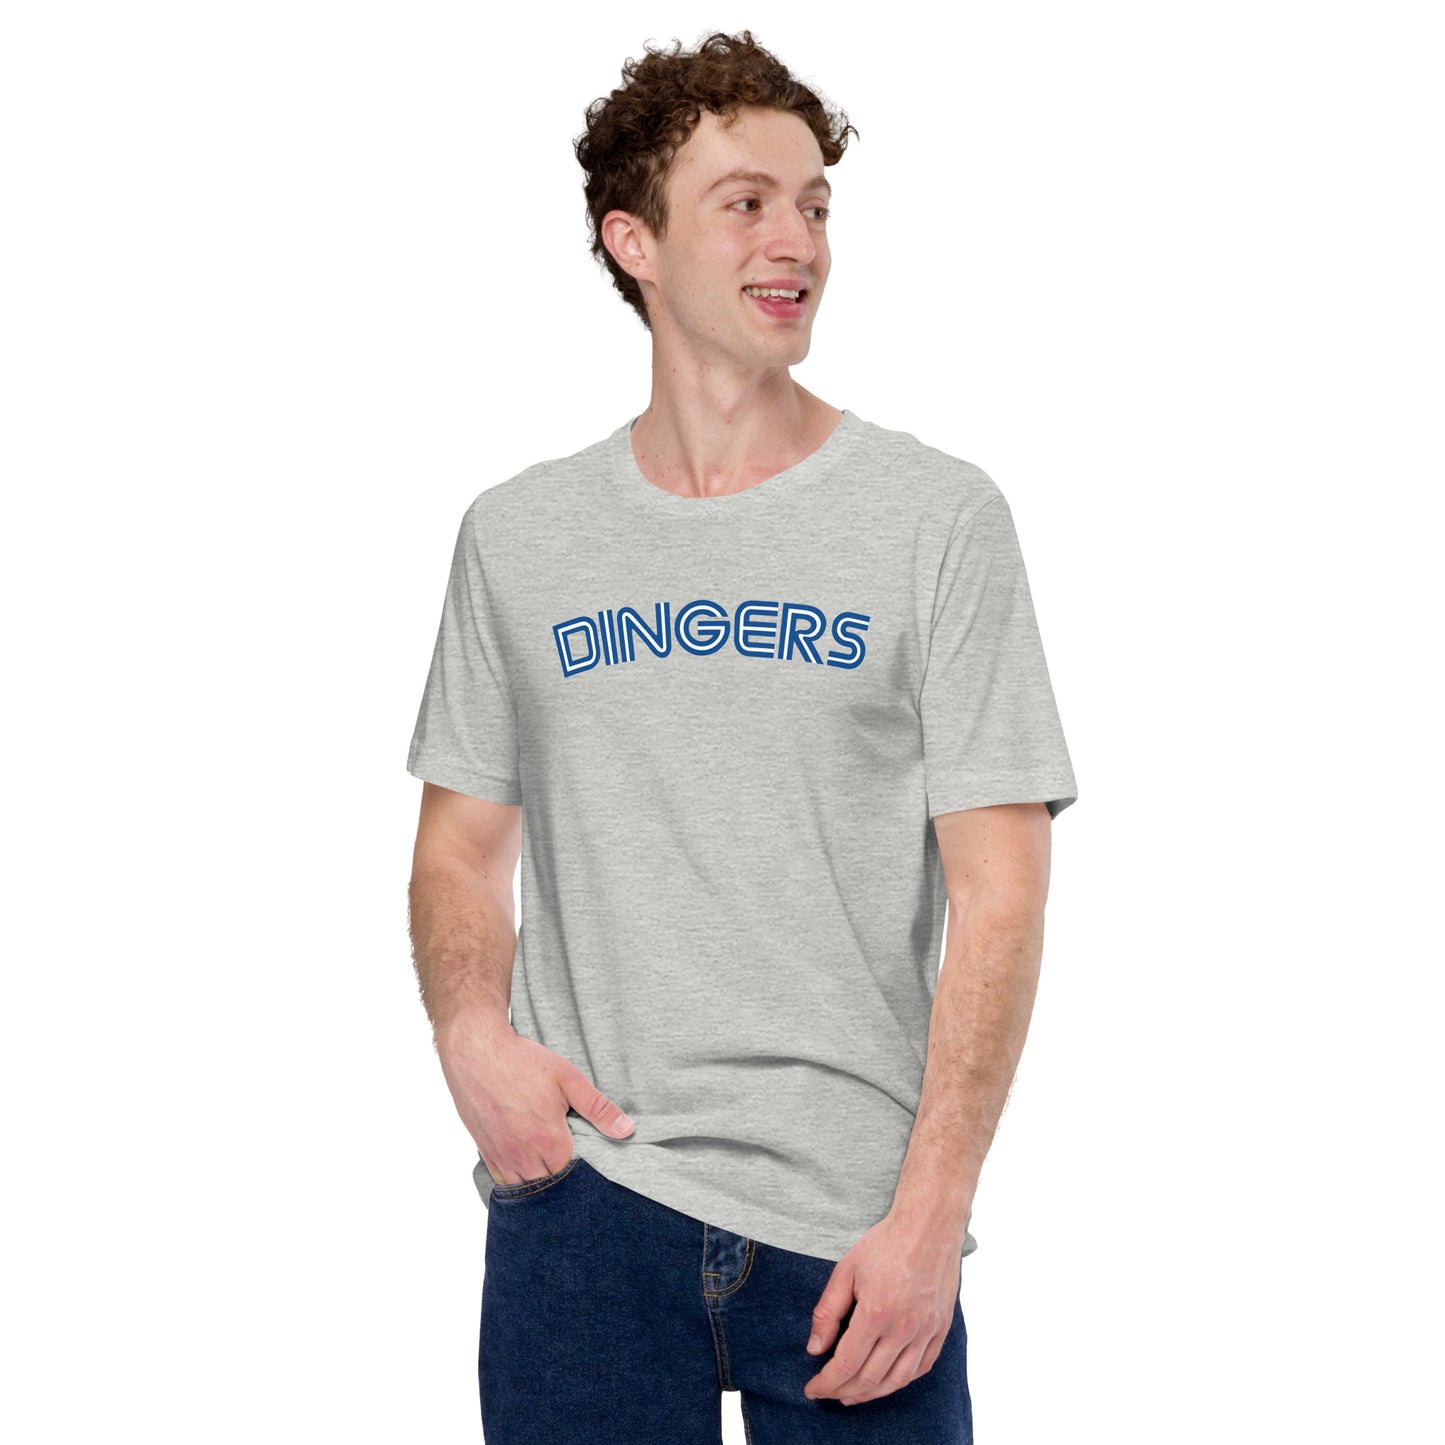 Image of young man wearing heather athletic grey t-shirt with design of "DINGERS" in Toronto Blue Jays retro blue style font located on centre chest. This design is exclusive to Tailgate Mercantile and available only online.